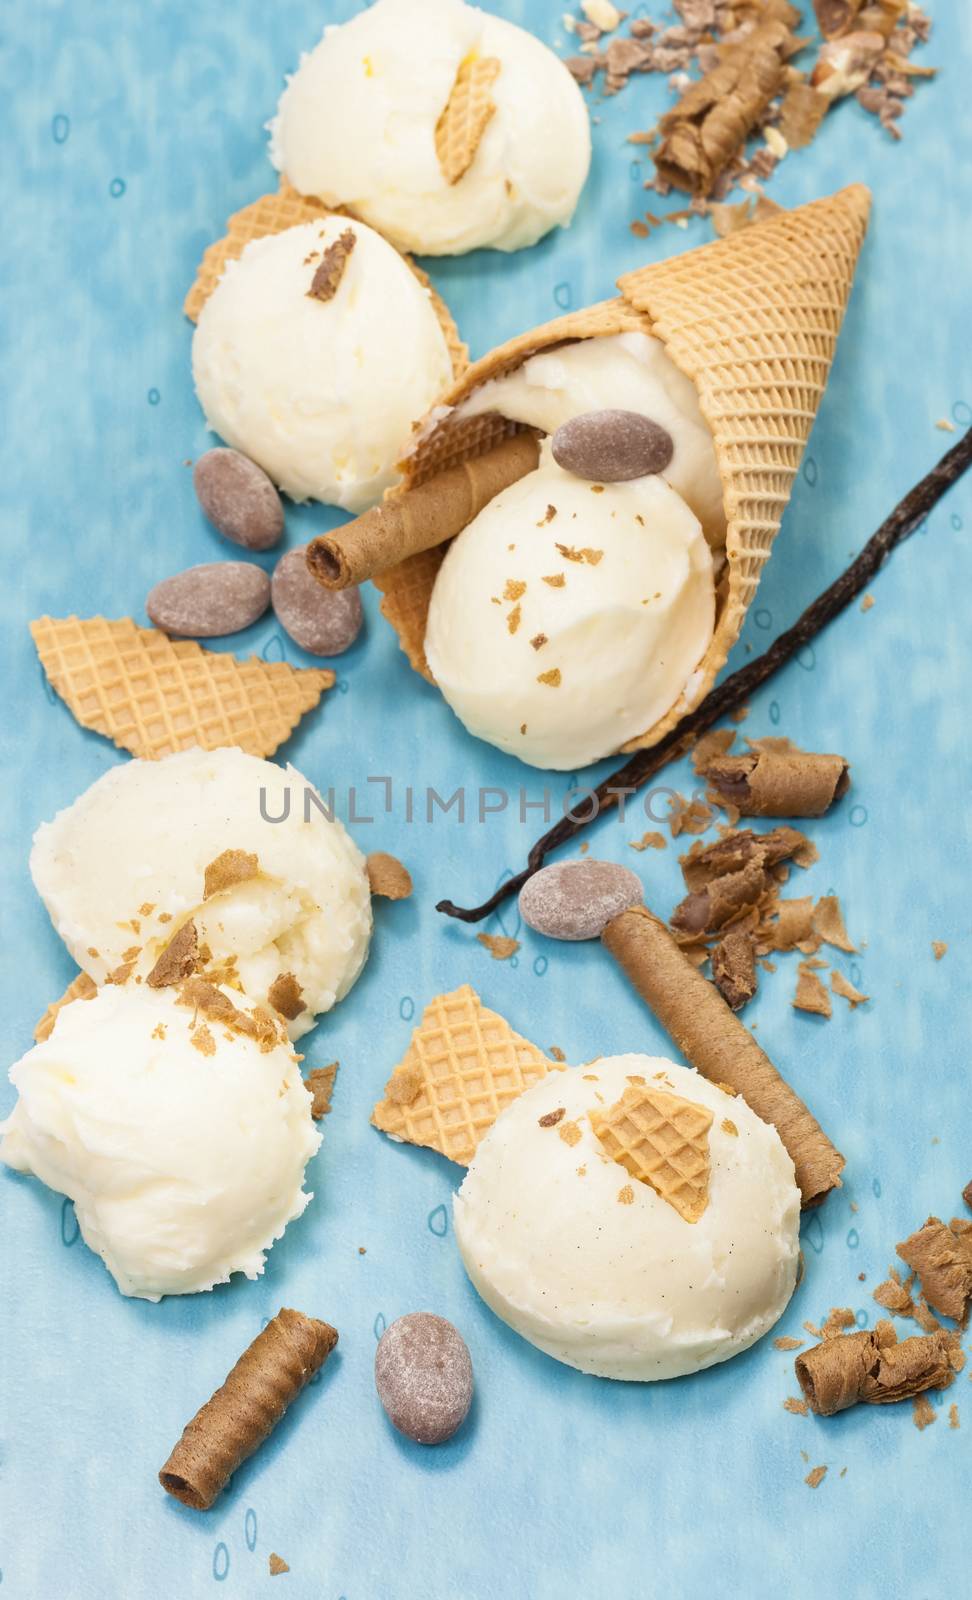 Vanilla Ice Cream, cone and cone pieces scattered. Macro photograph with shallow depth of field.